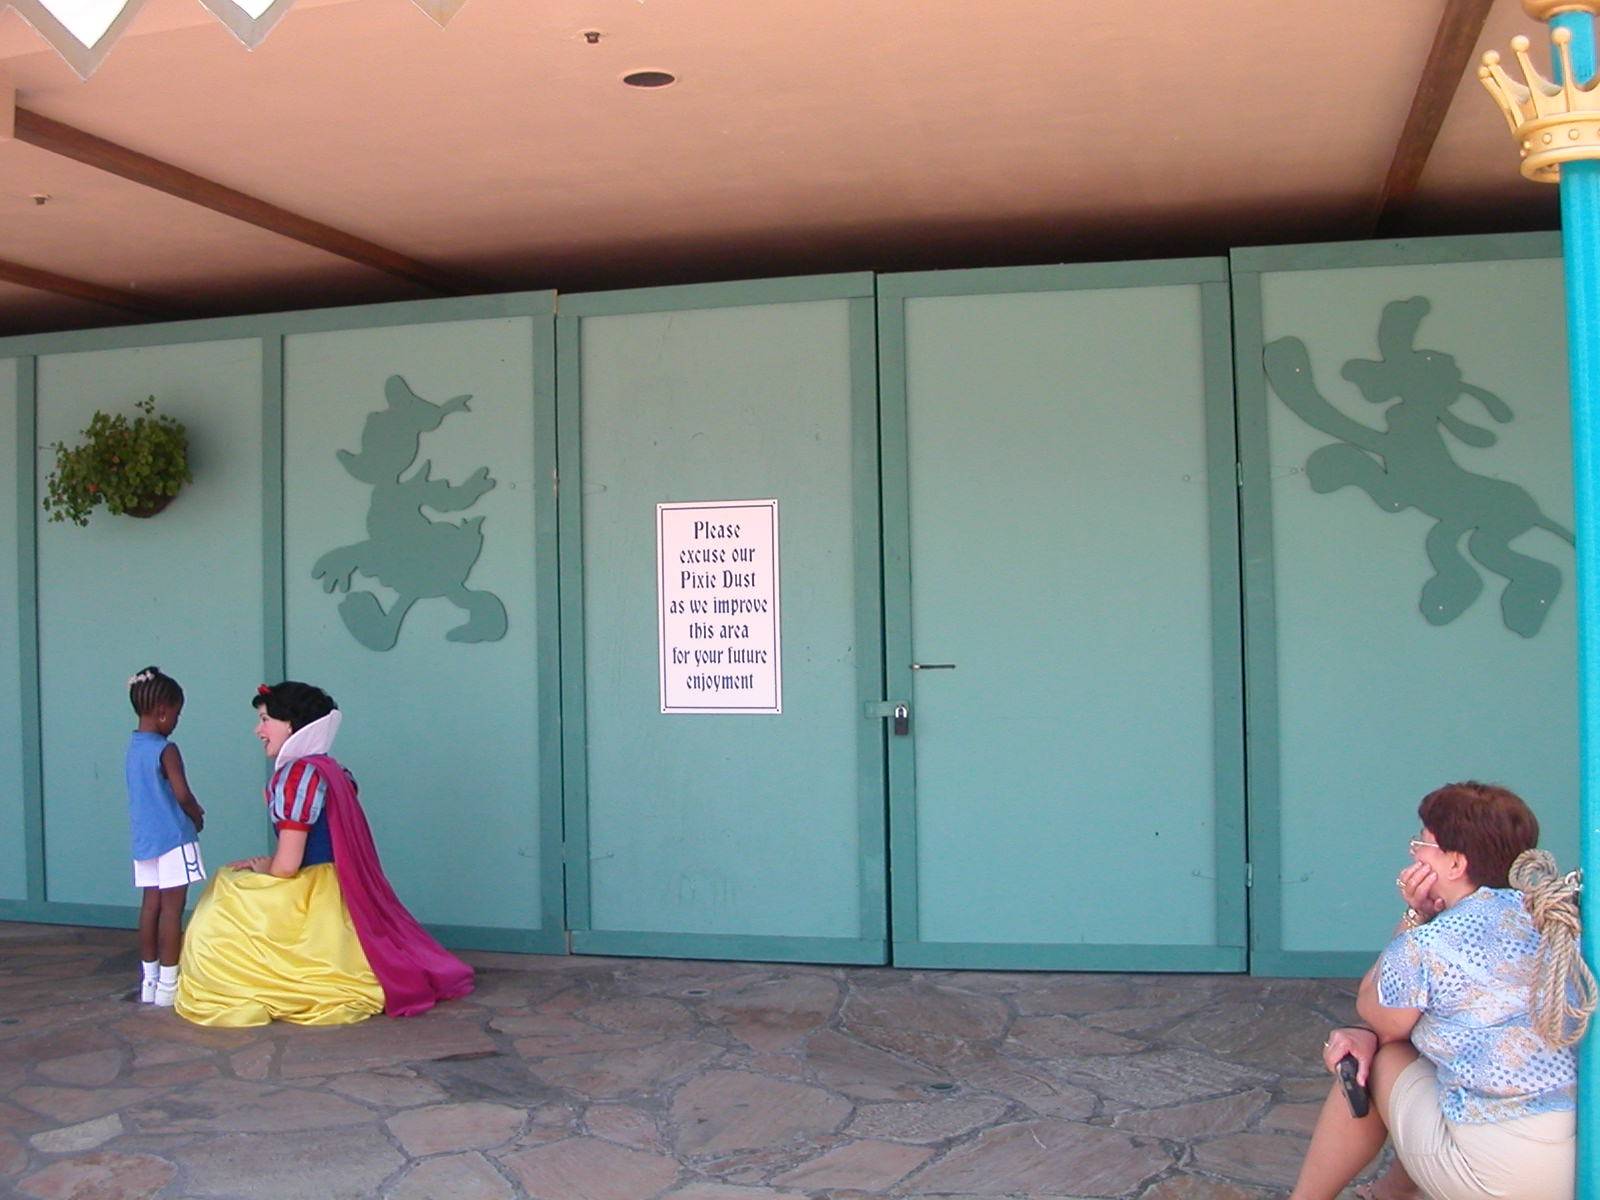 Snow White building walled off for refurbishment